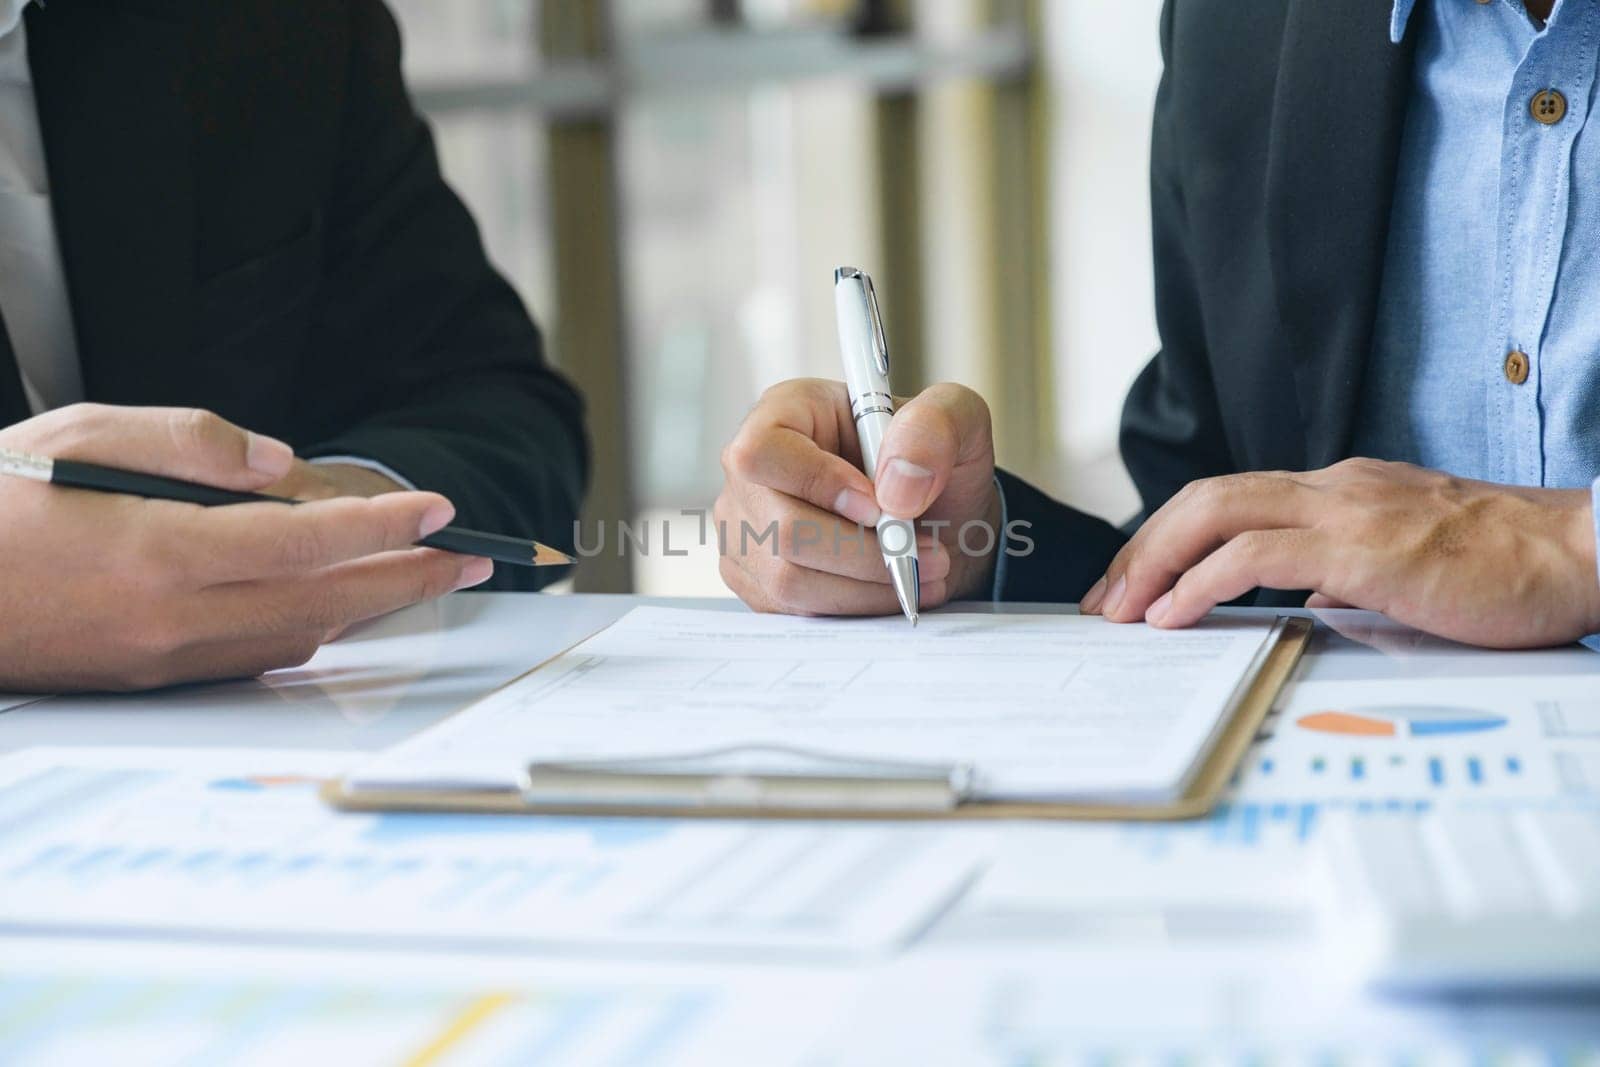 Business man sign a contract investment professional document agreement, ready signing profitable offer agreement after checking contract terms of conditions, executive manager involved in legal paperwork.